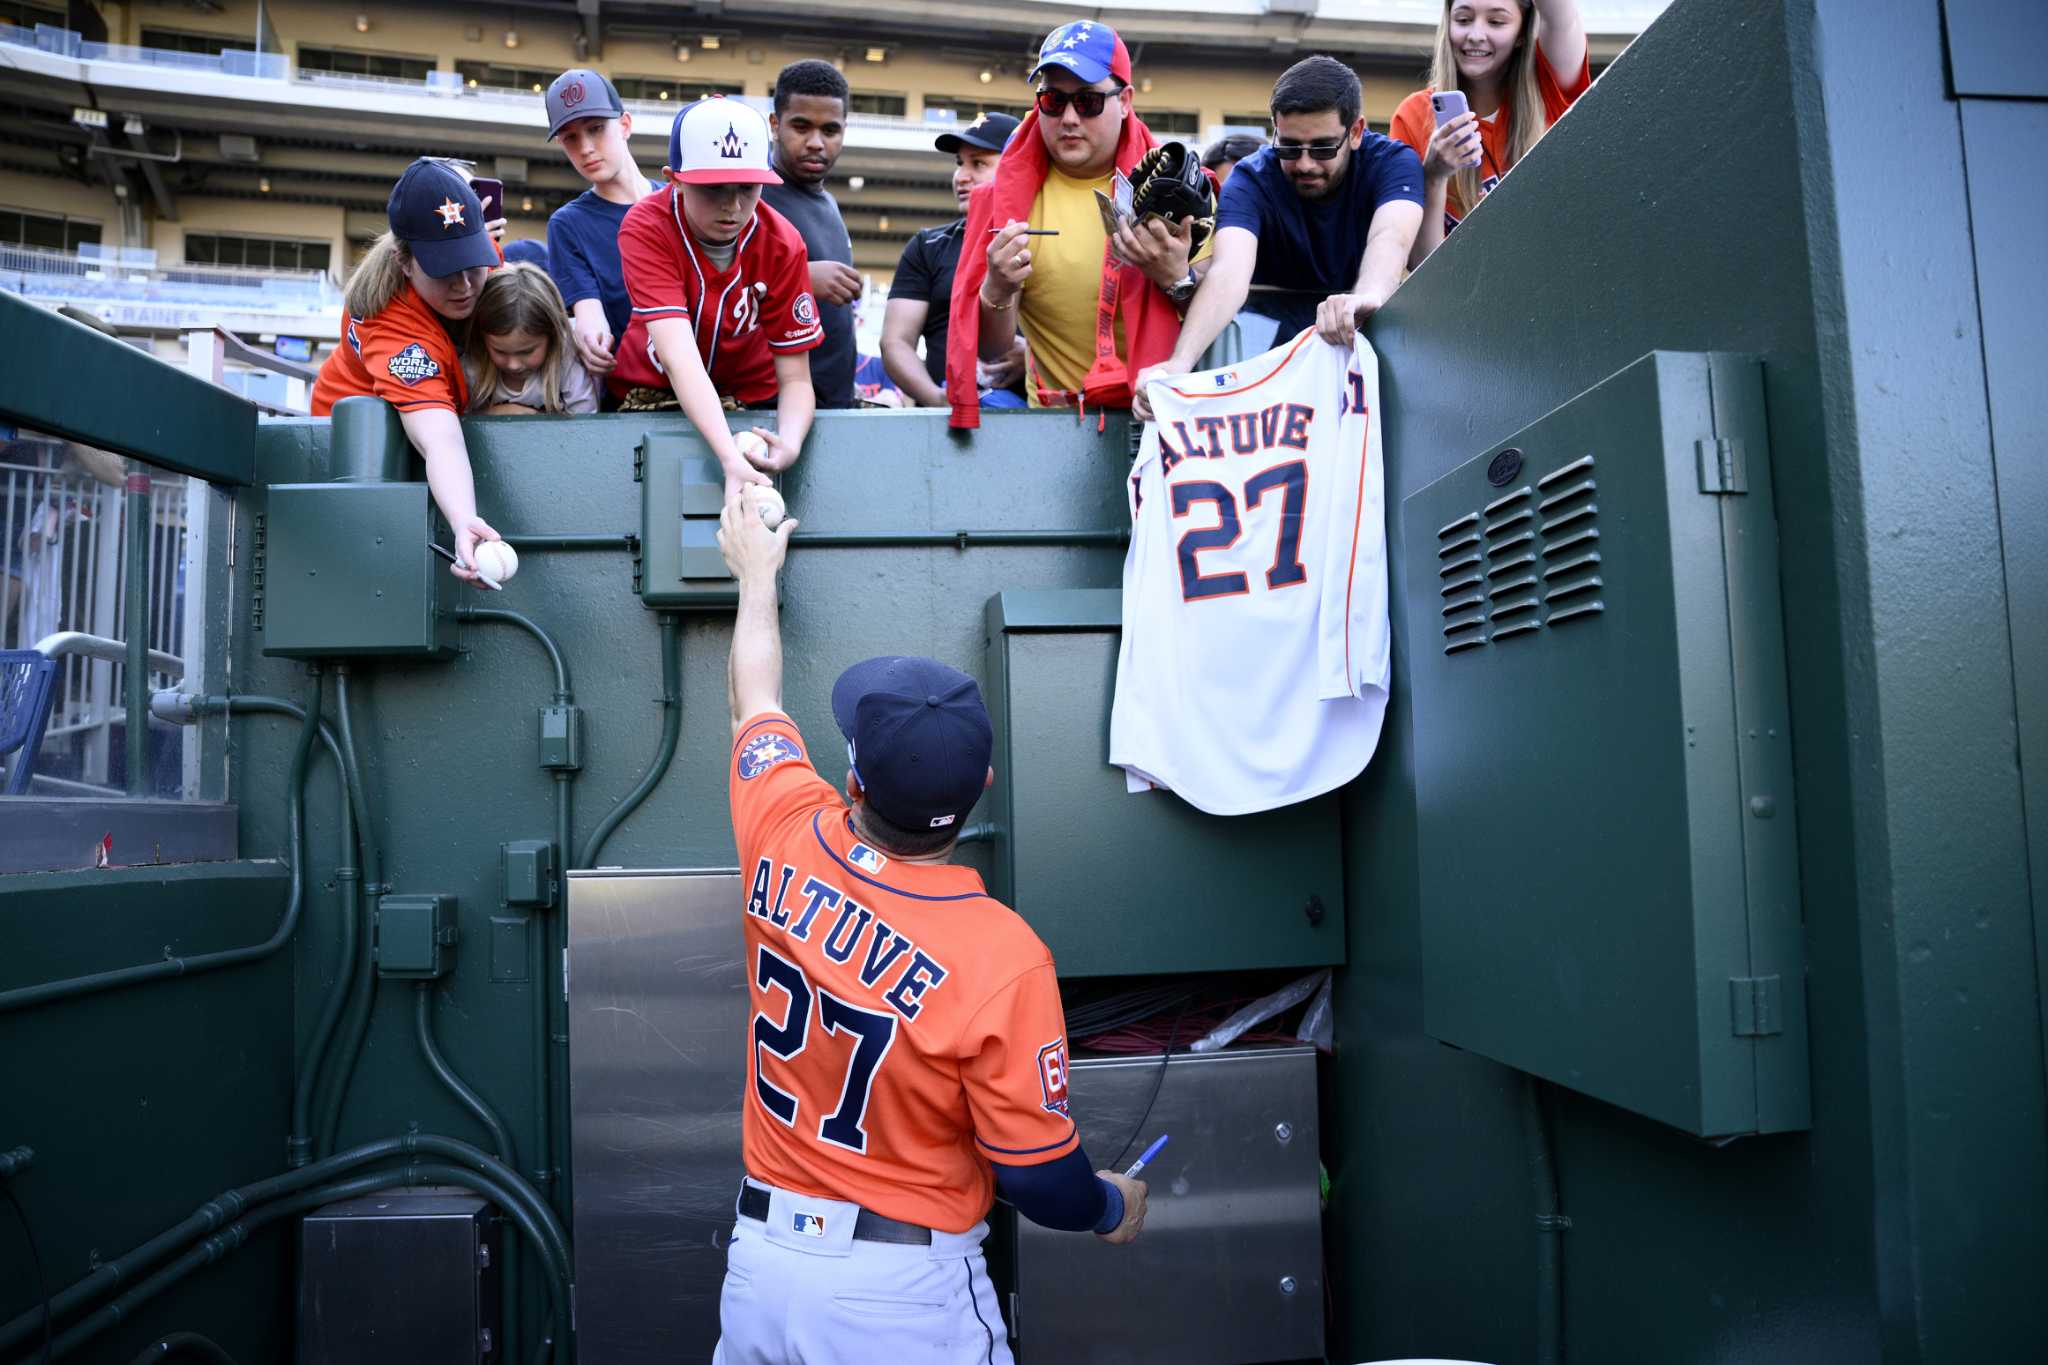 PHOTOS: Best Houston Astros' fans signs of the night - Game 6 at